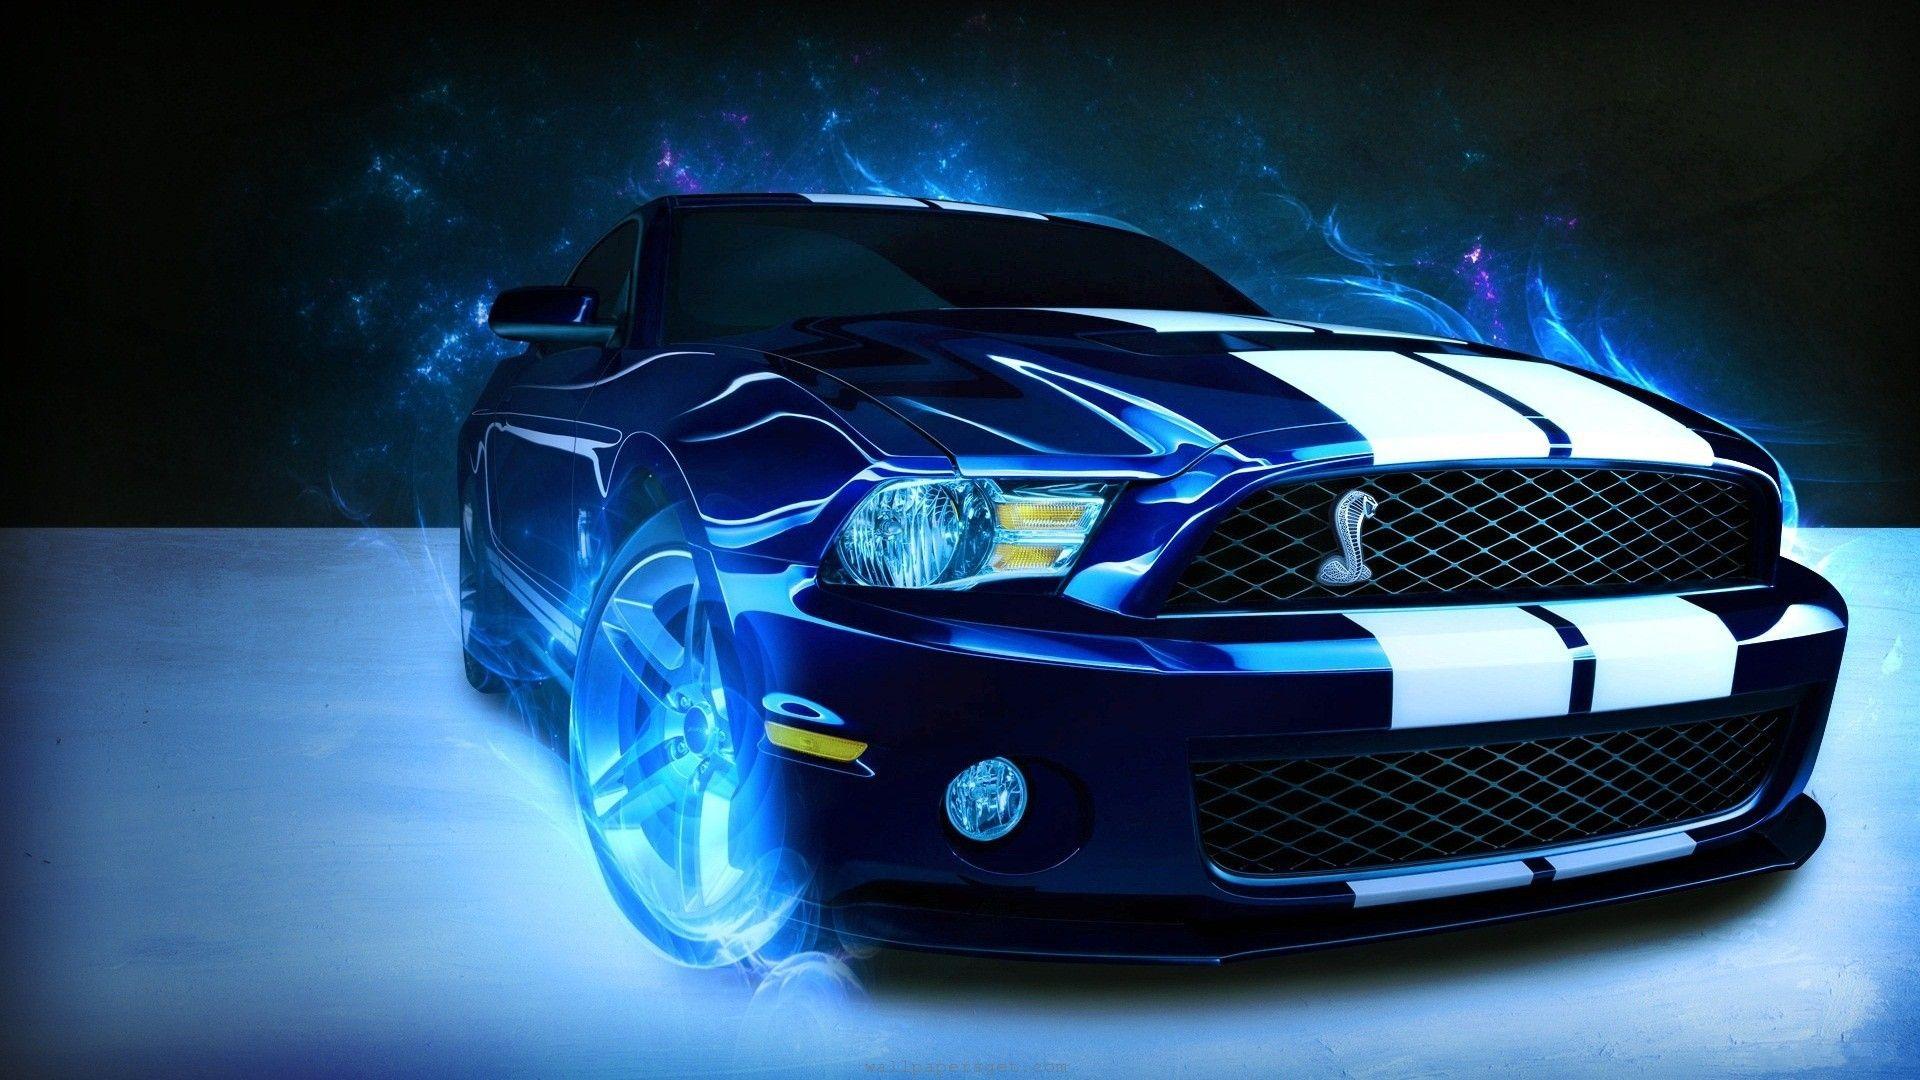 Blue Mustang Wallpapers Top Free Blue Mustang Backgrounds Wallpaperaccess